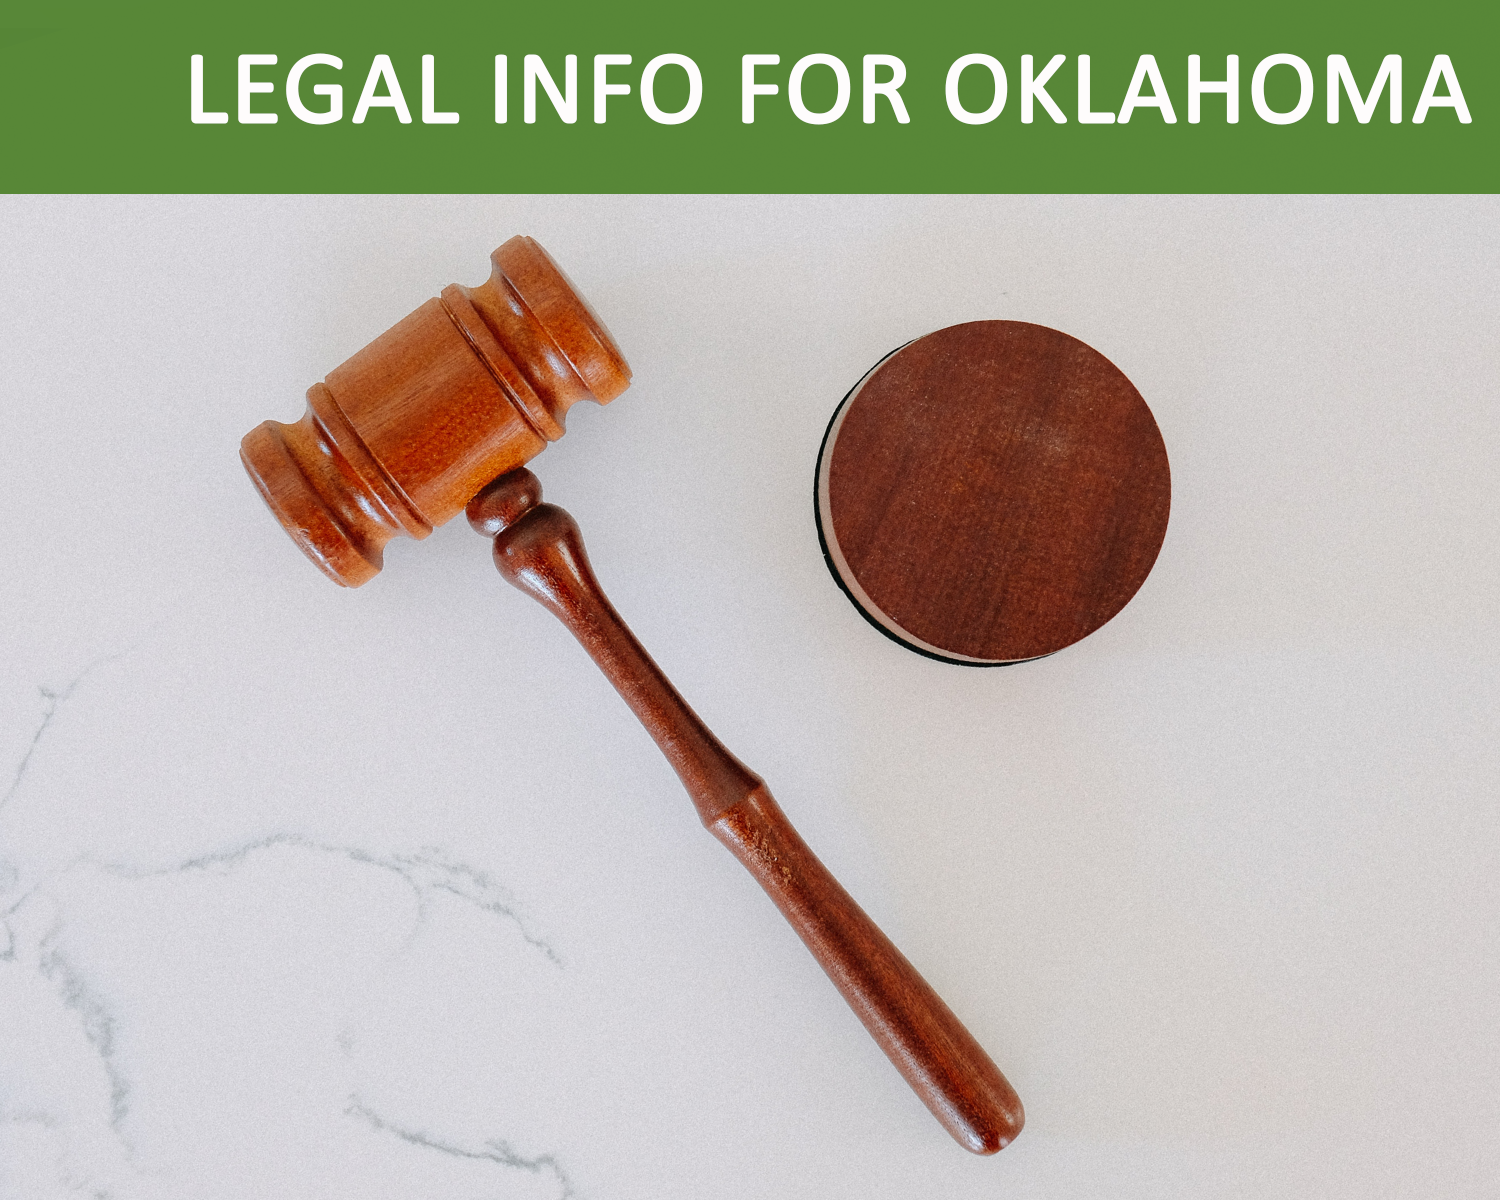 View Legal Information for Oklahoma